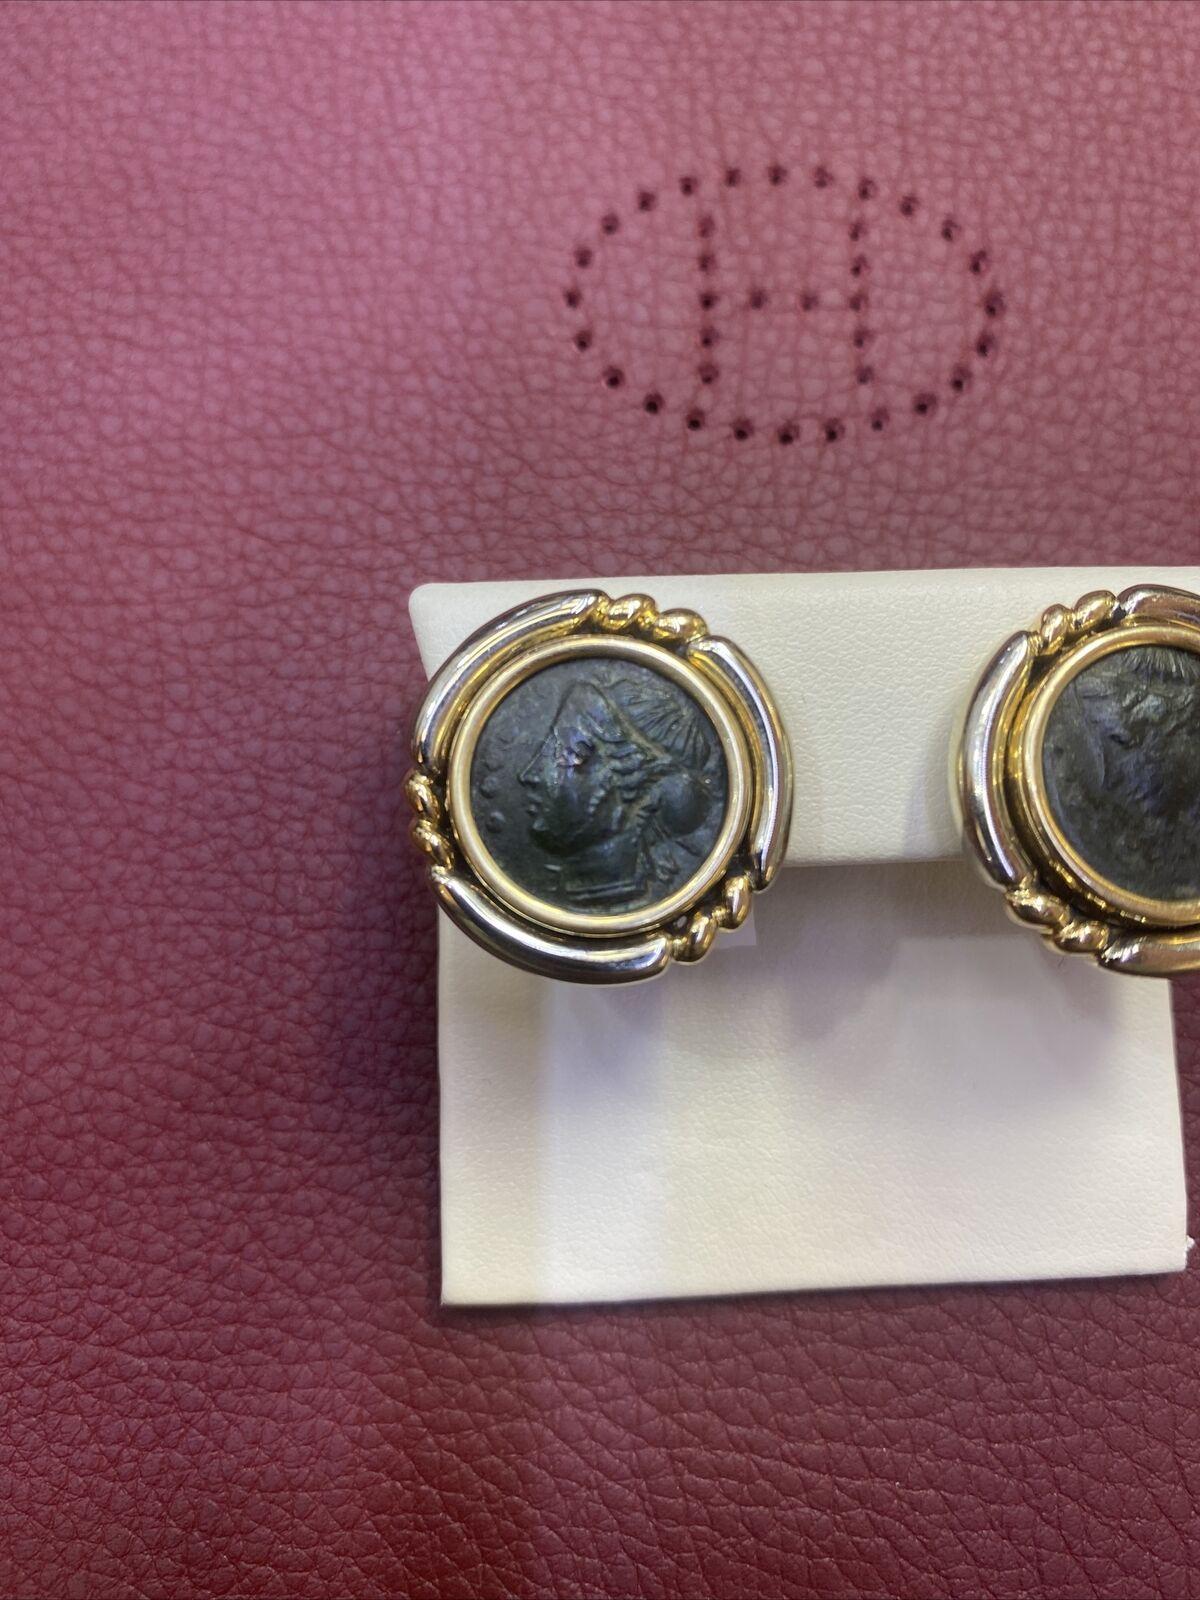 Bvlgari Two Tone 18k Gold Ancient Roman Coin Earrings.


A very rare pair of 18k two tone yellow gold and white gold Ancient Roman coin earrings by Bvlgari. Earrings are 20mm x 20mm. Marked: Bvlgari with Italian maker mark, 750. Weight - 26.6